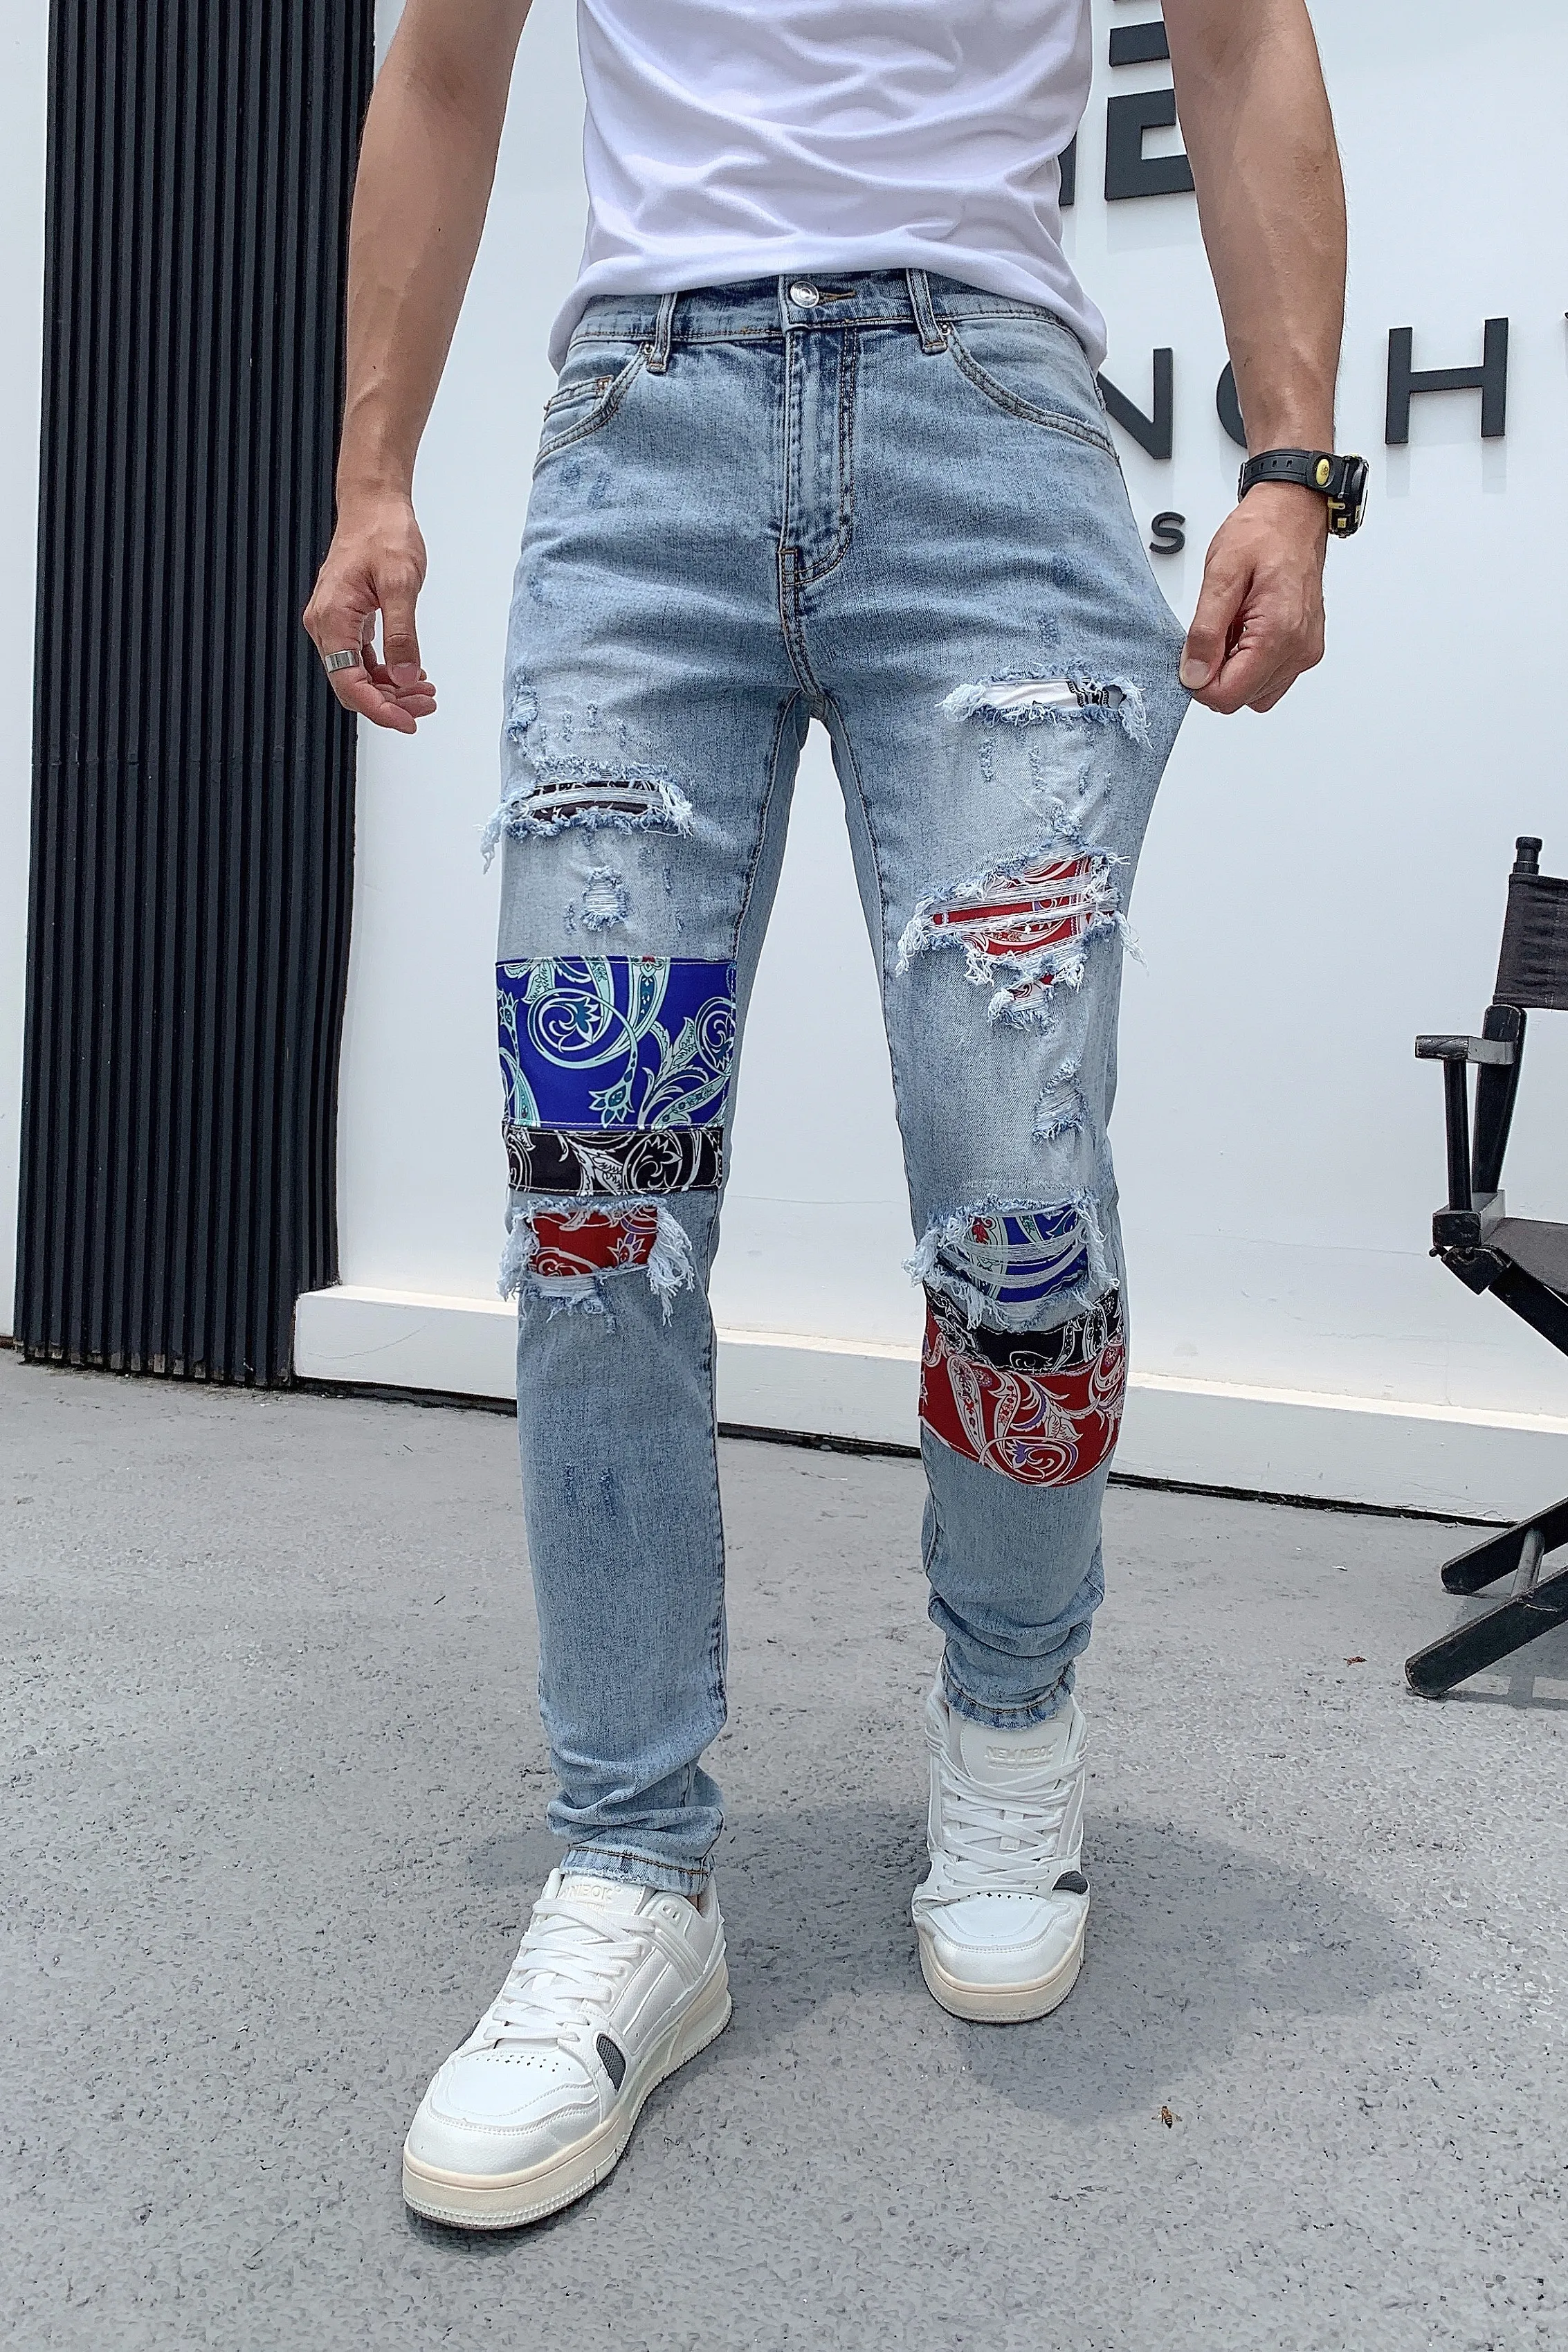 DSQ Jeans Herren Luxus-Designer-Jeans Skinny Ripped Cool Guy Causal Hole Denim Fashion Brand Fit Hose Men Washed Pants